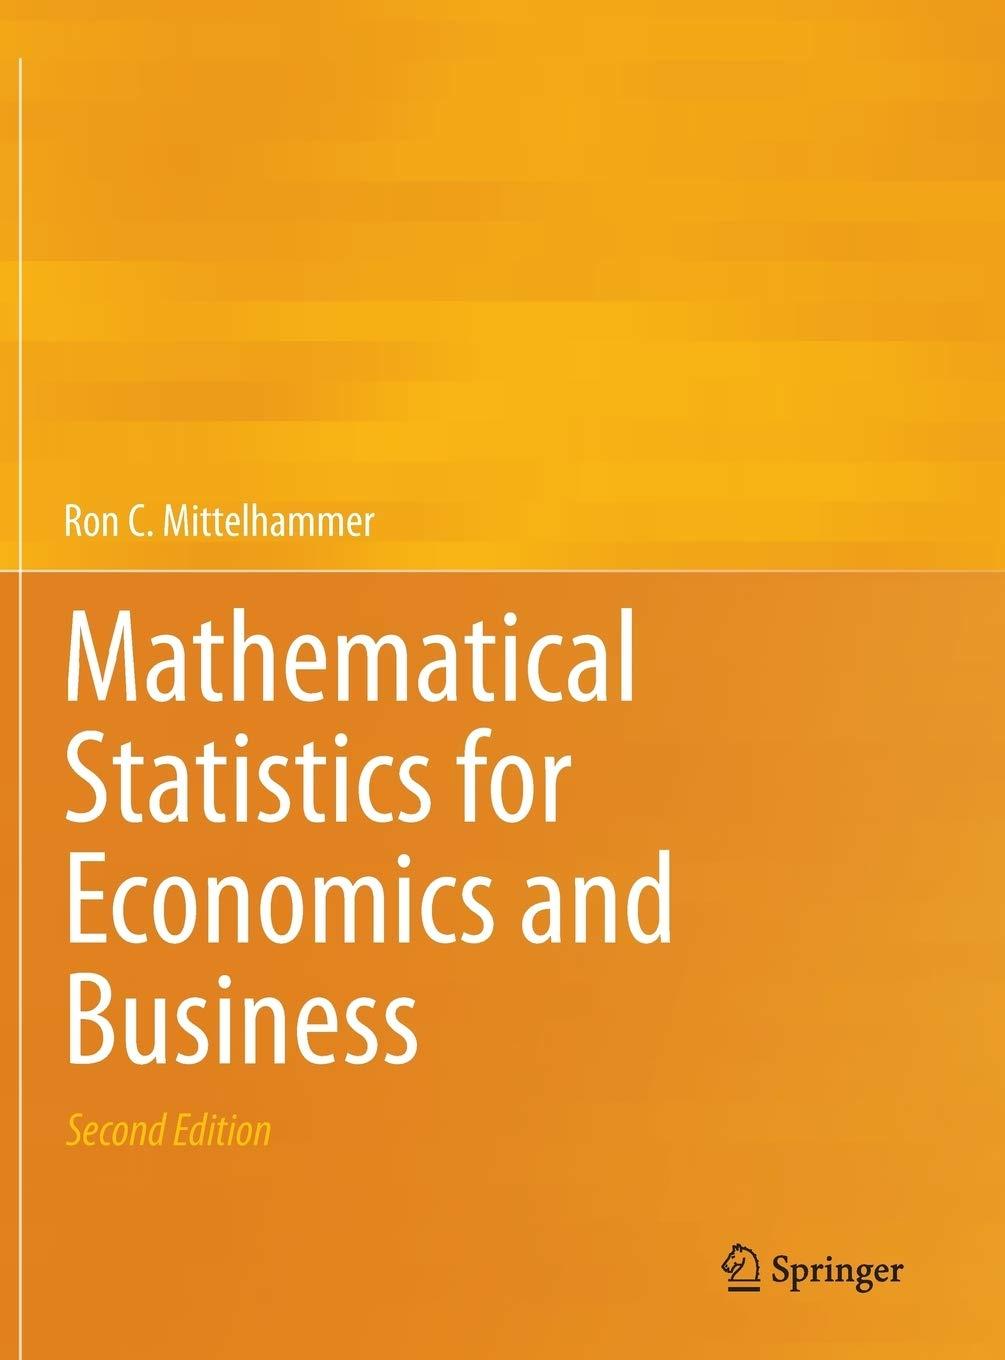 mathematical statistics for economics and business 2nd edition ron c. mittelhammer 1461450217, 9781461450214